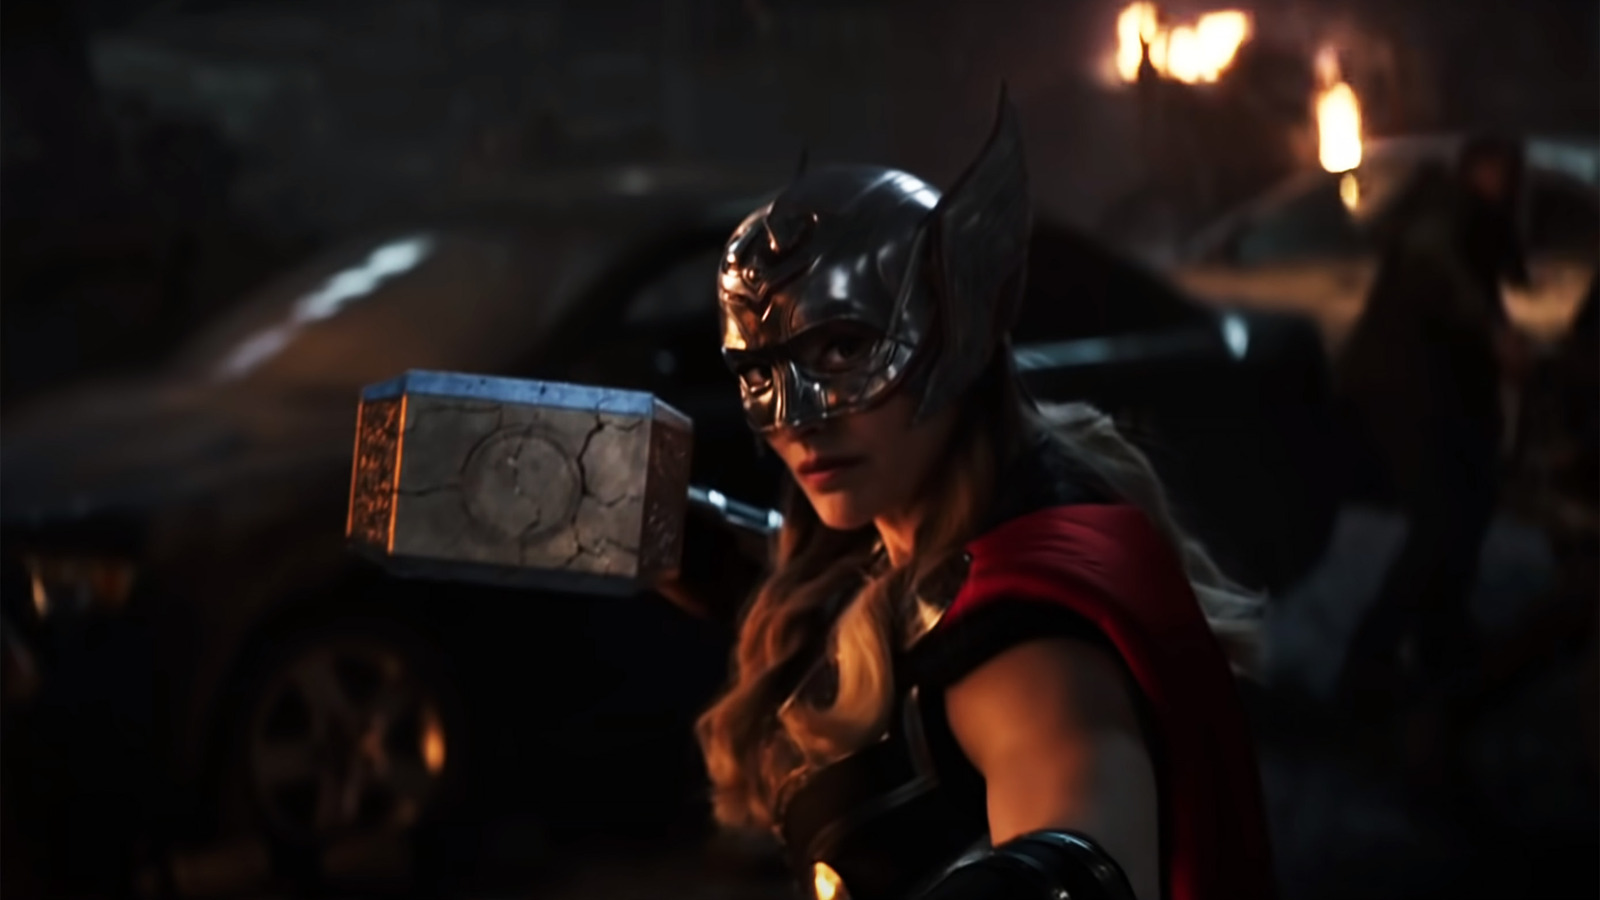 We Are Very Excited For Natalie Portman And Natalie Portman's Arms In Thor: Love And Thunder